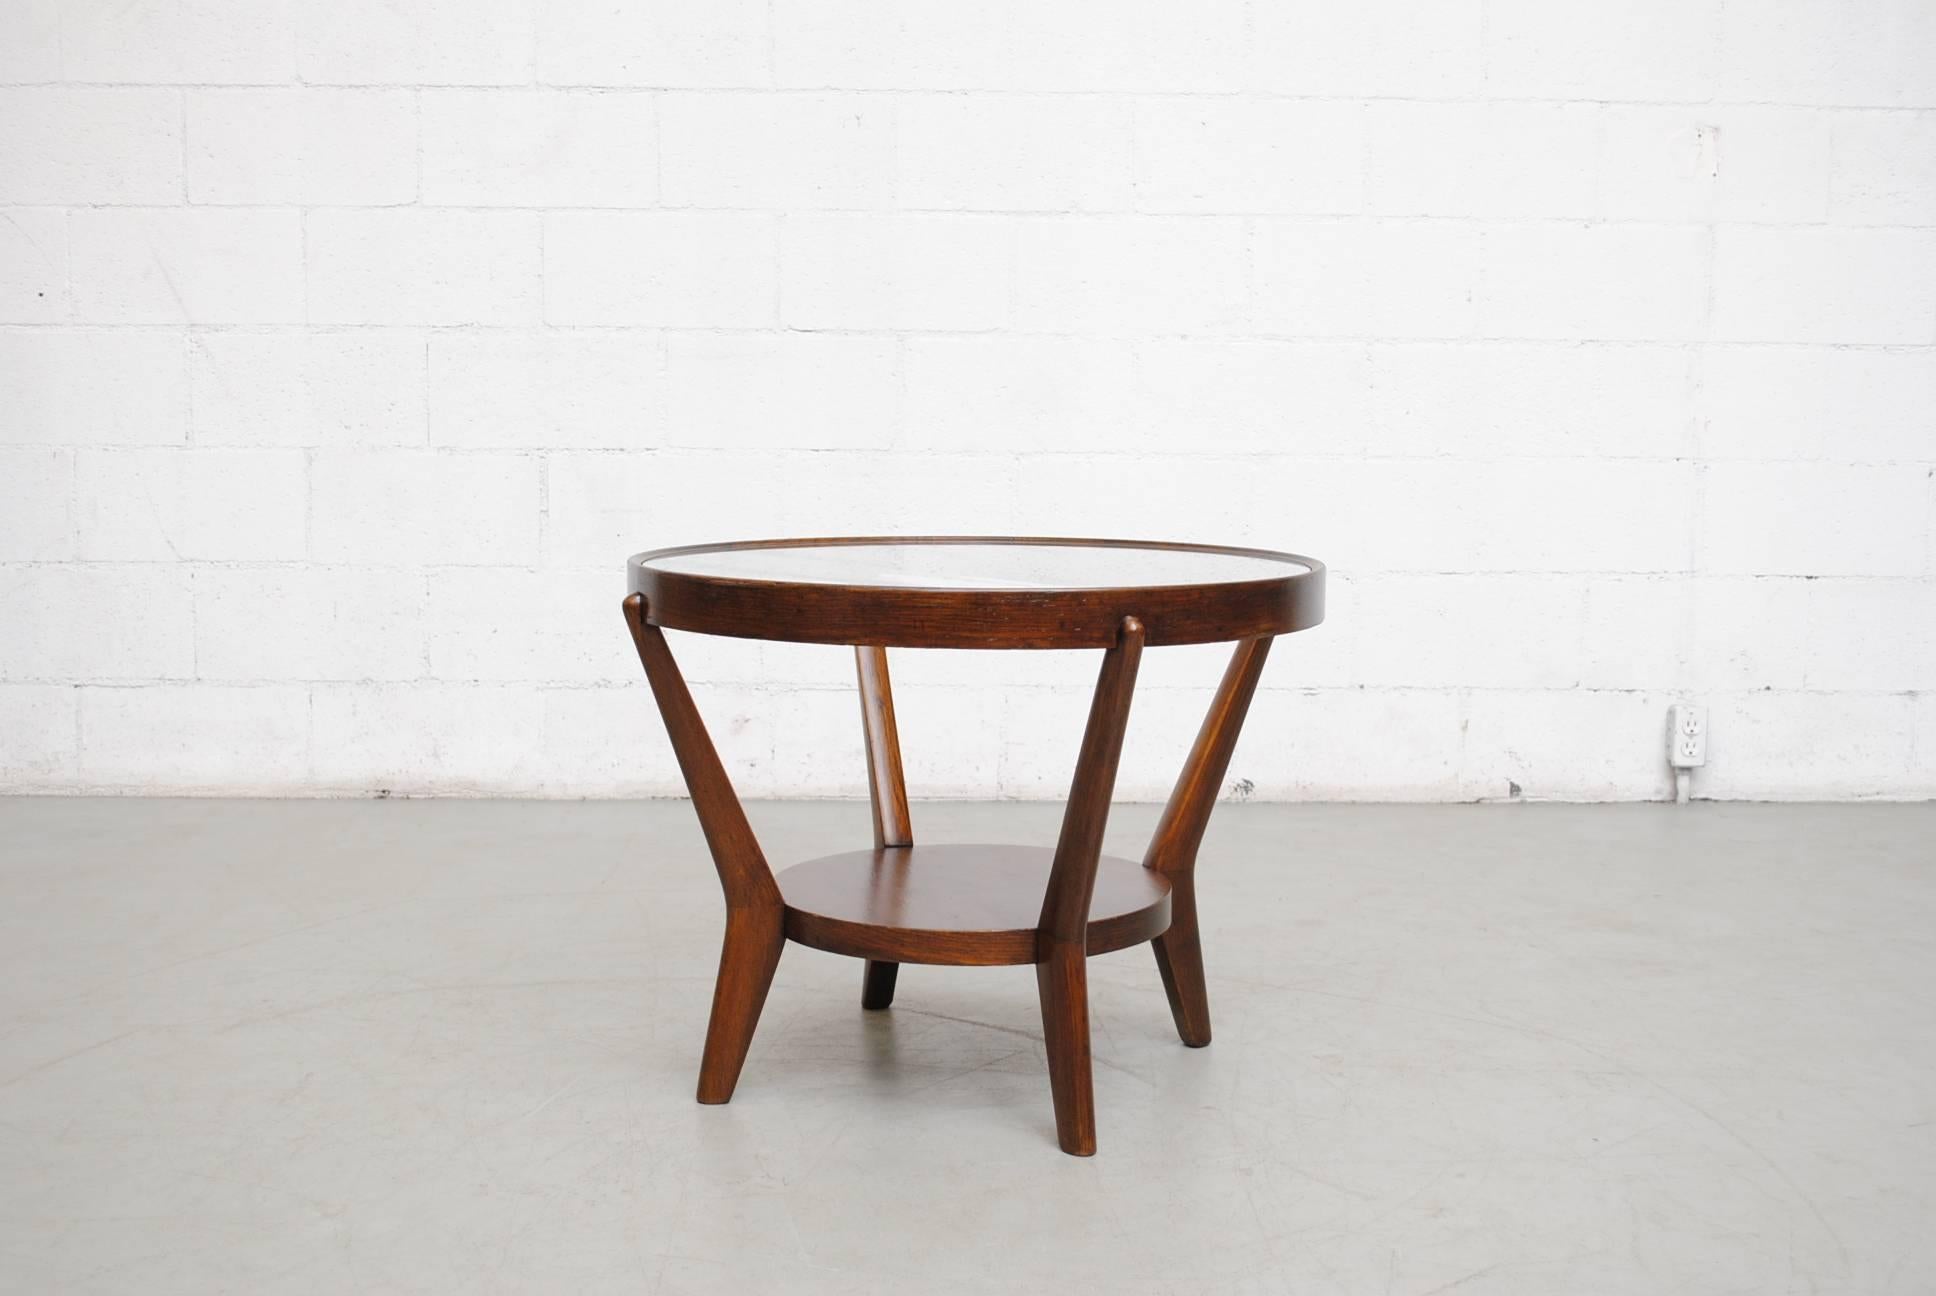 Round functionalist dark wood side table with inset glass top and wood lower shelf. Designed by Antonín Kropácek and Karel Koželka. The table was part of a set that won silver at the Milano Triennale of 1947. In original condition. Others available